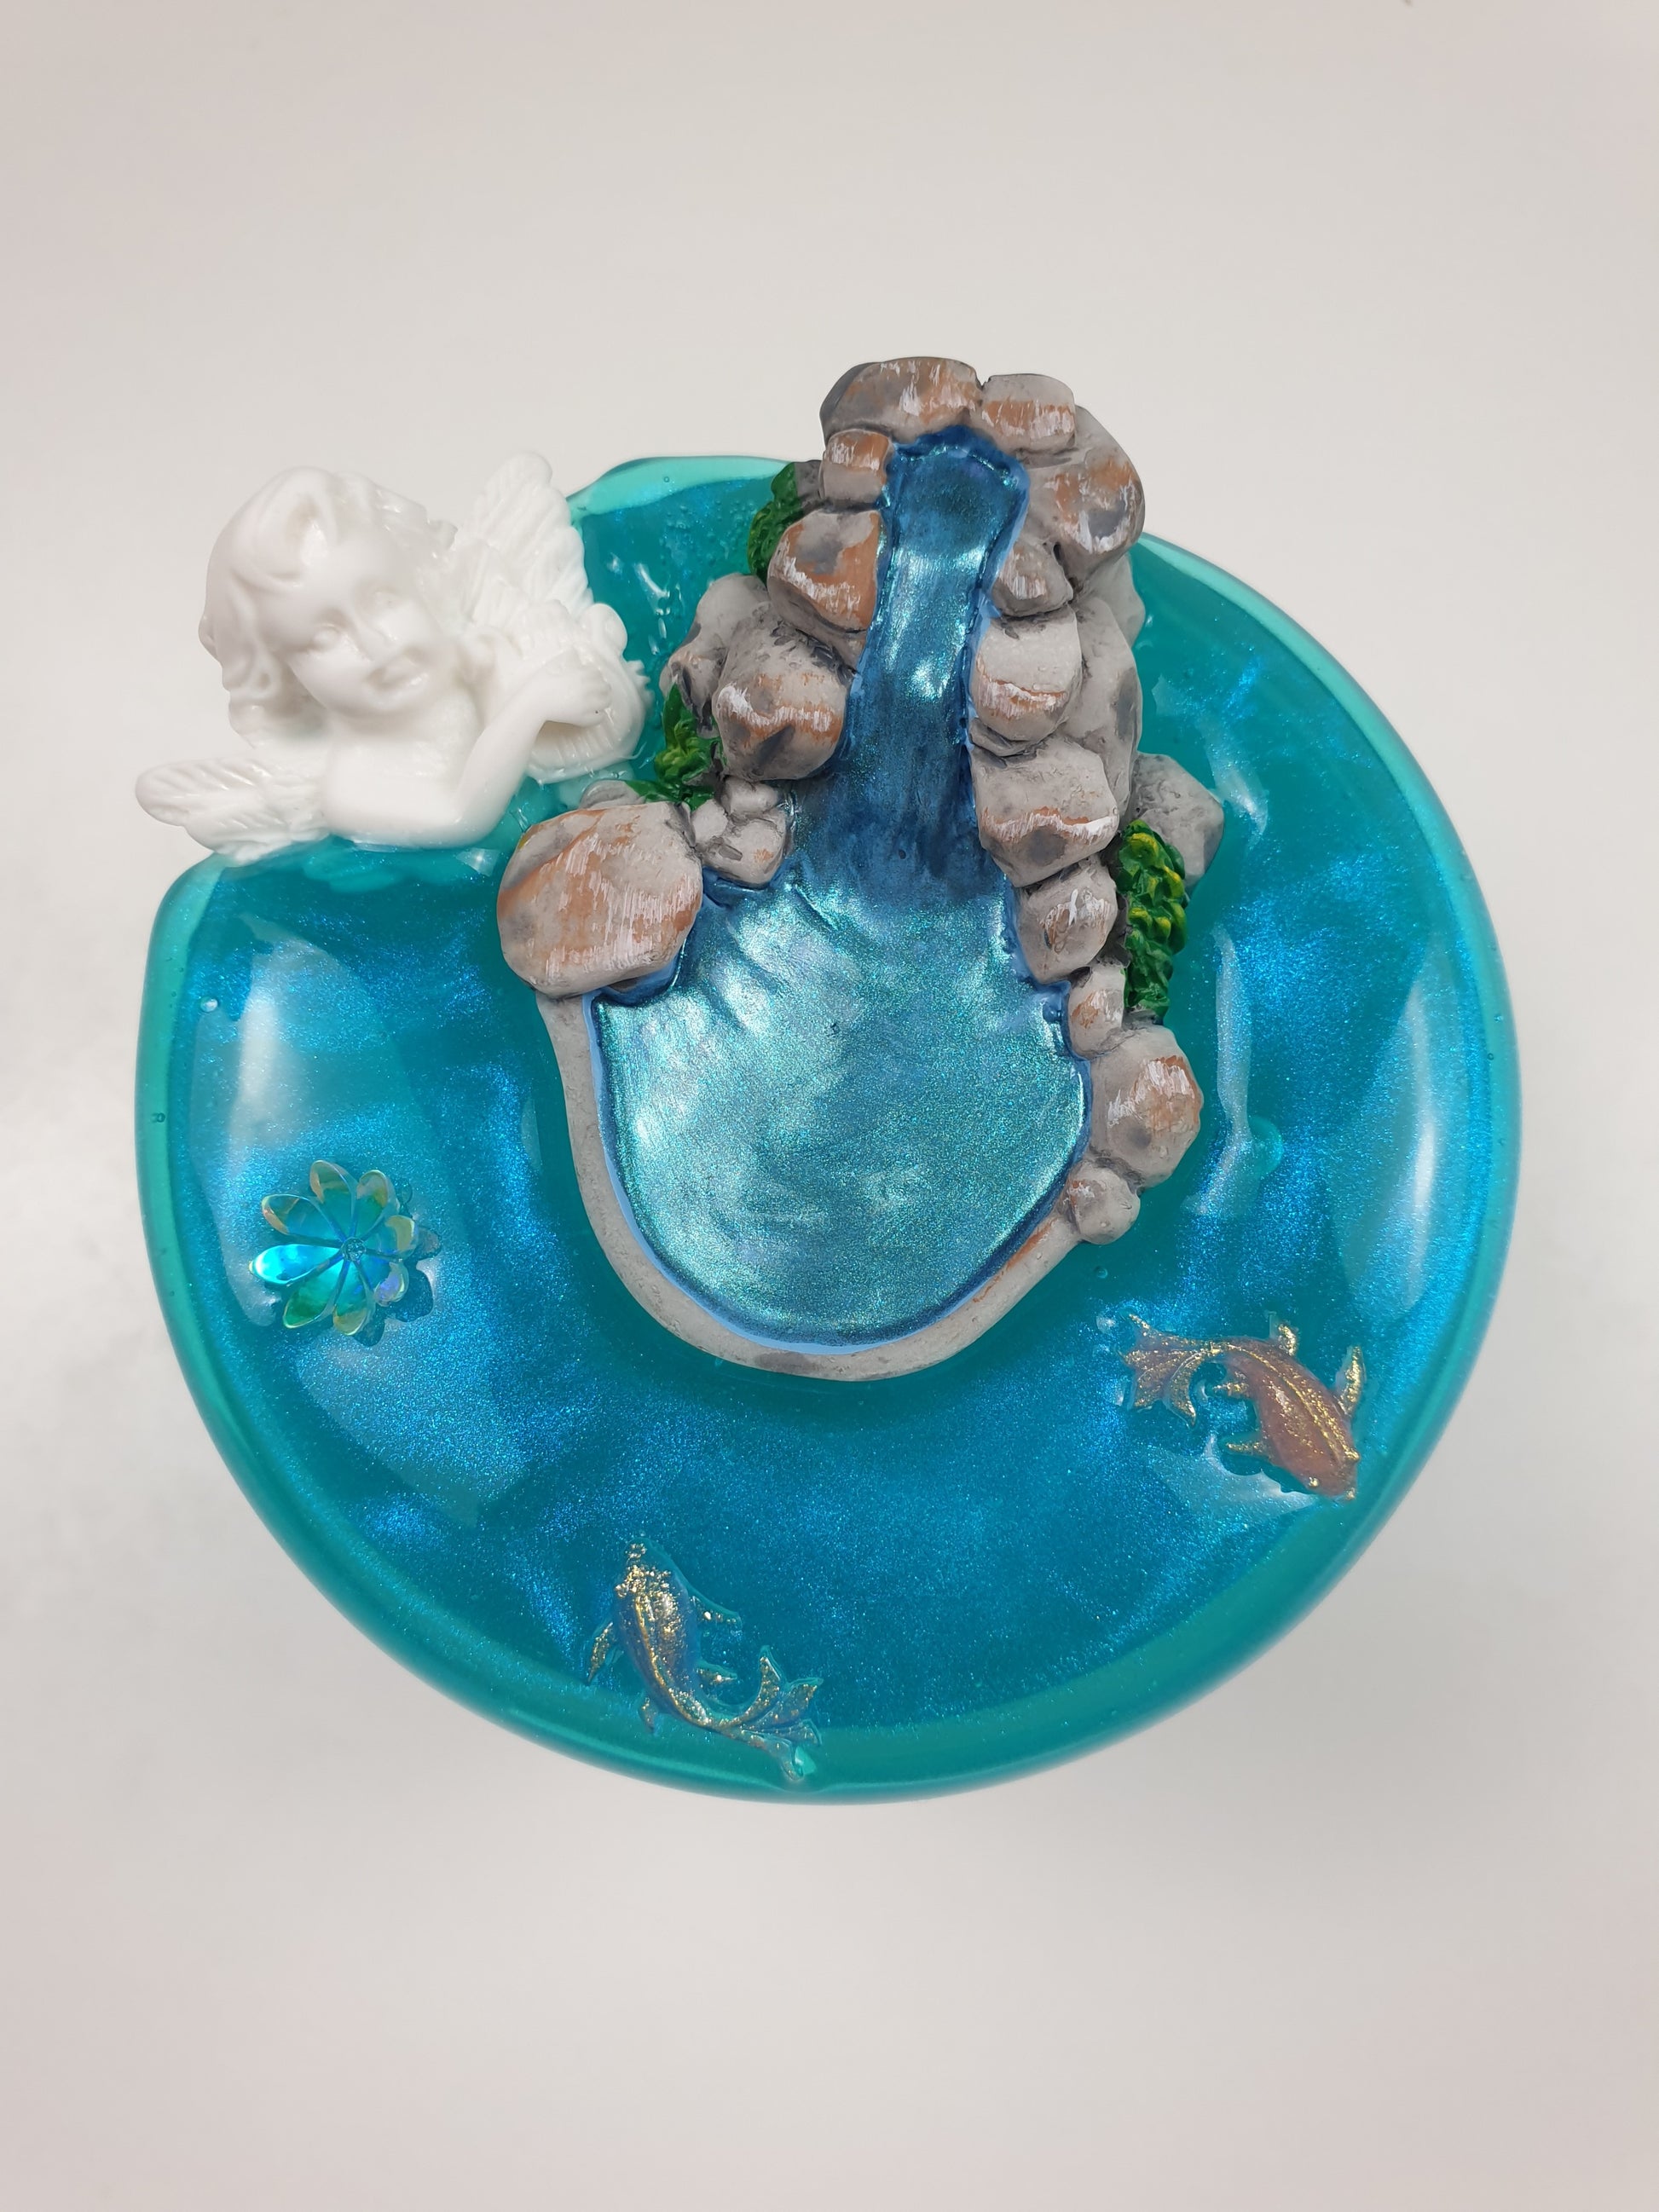 Blue Clear Slime with Fish and Fountain Handmade in Australia